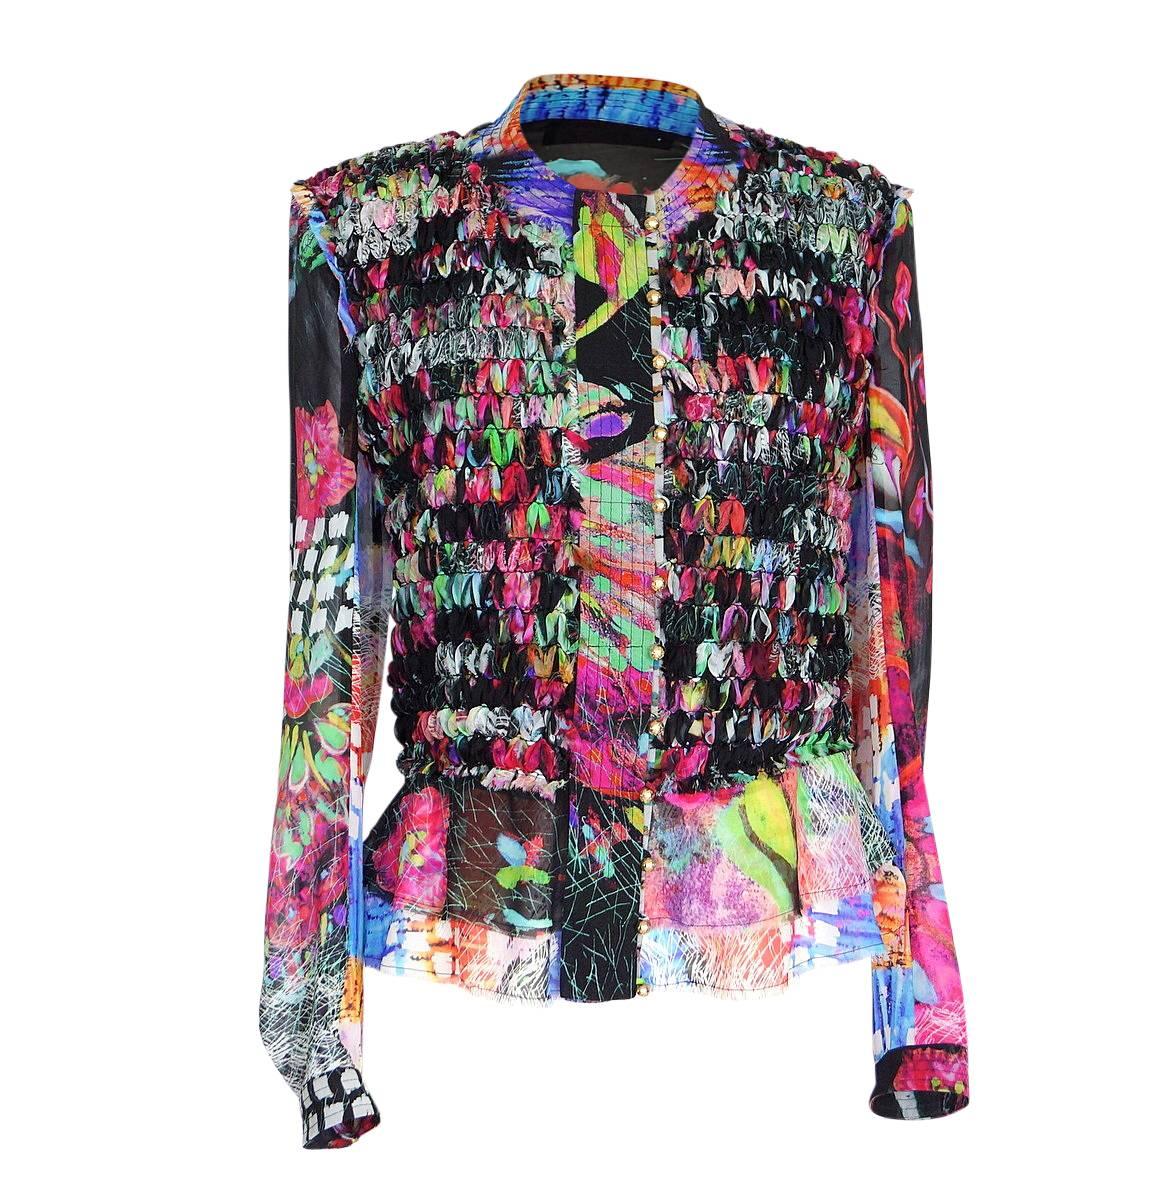 Roberto Cavalli Top Blouse Intricate Ribbon Vivid Colors 44 / 10 fits 8 For Sale 2